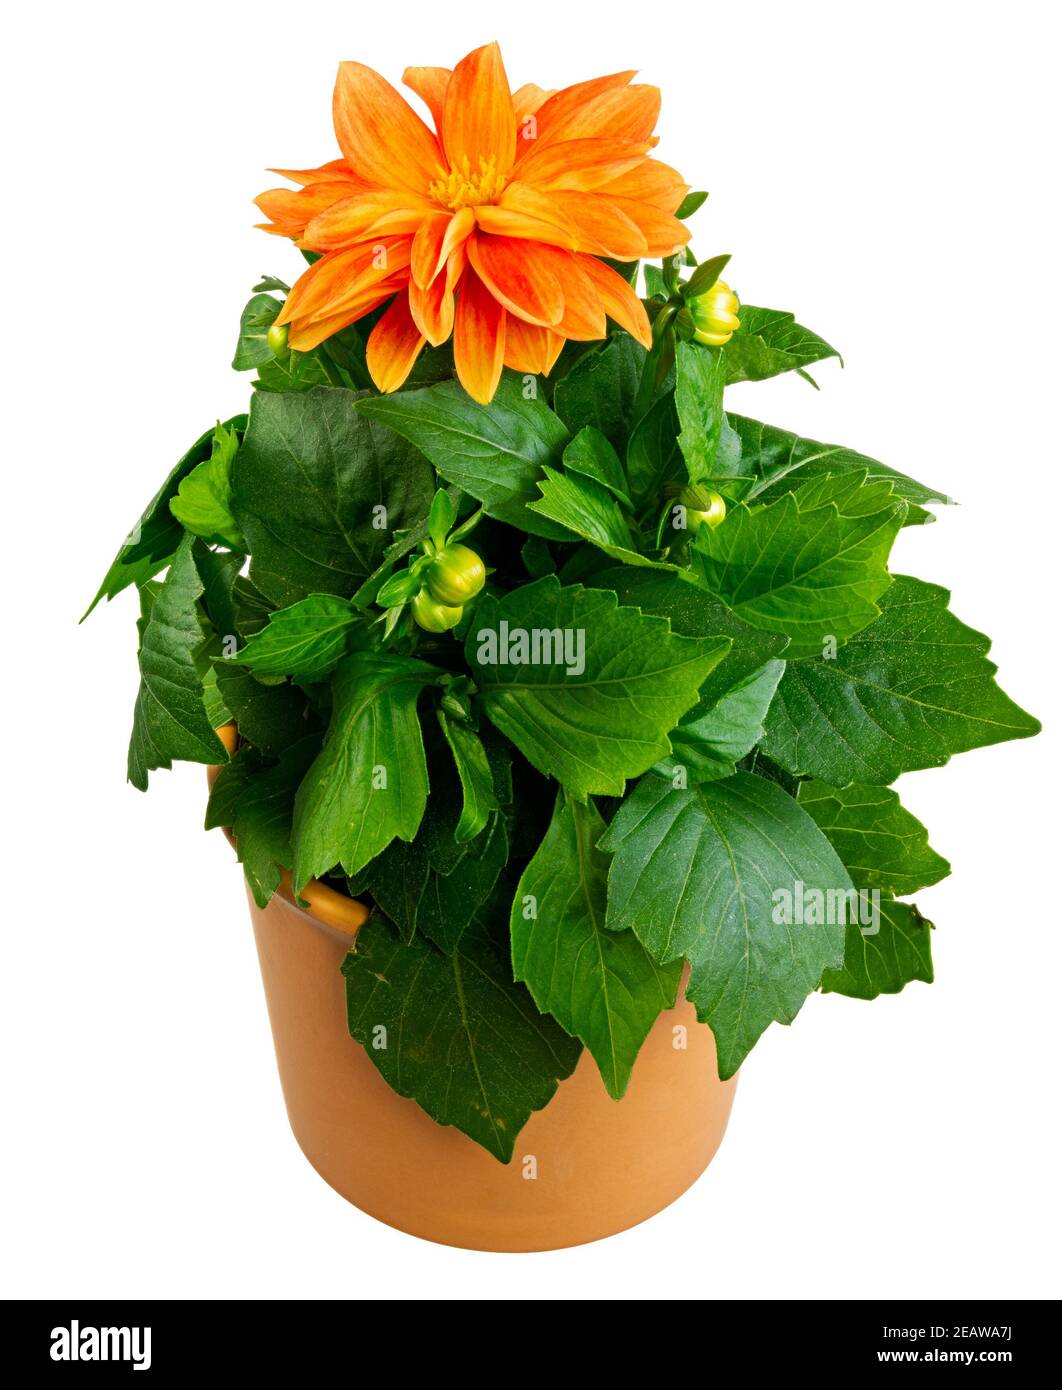 Isolated potted dahlia flower Stock Photo